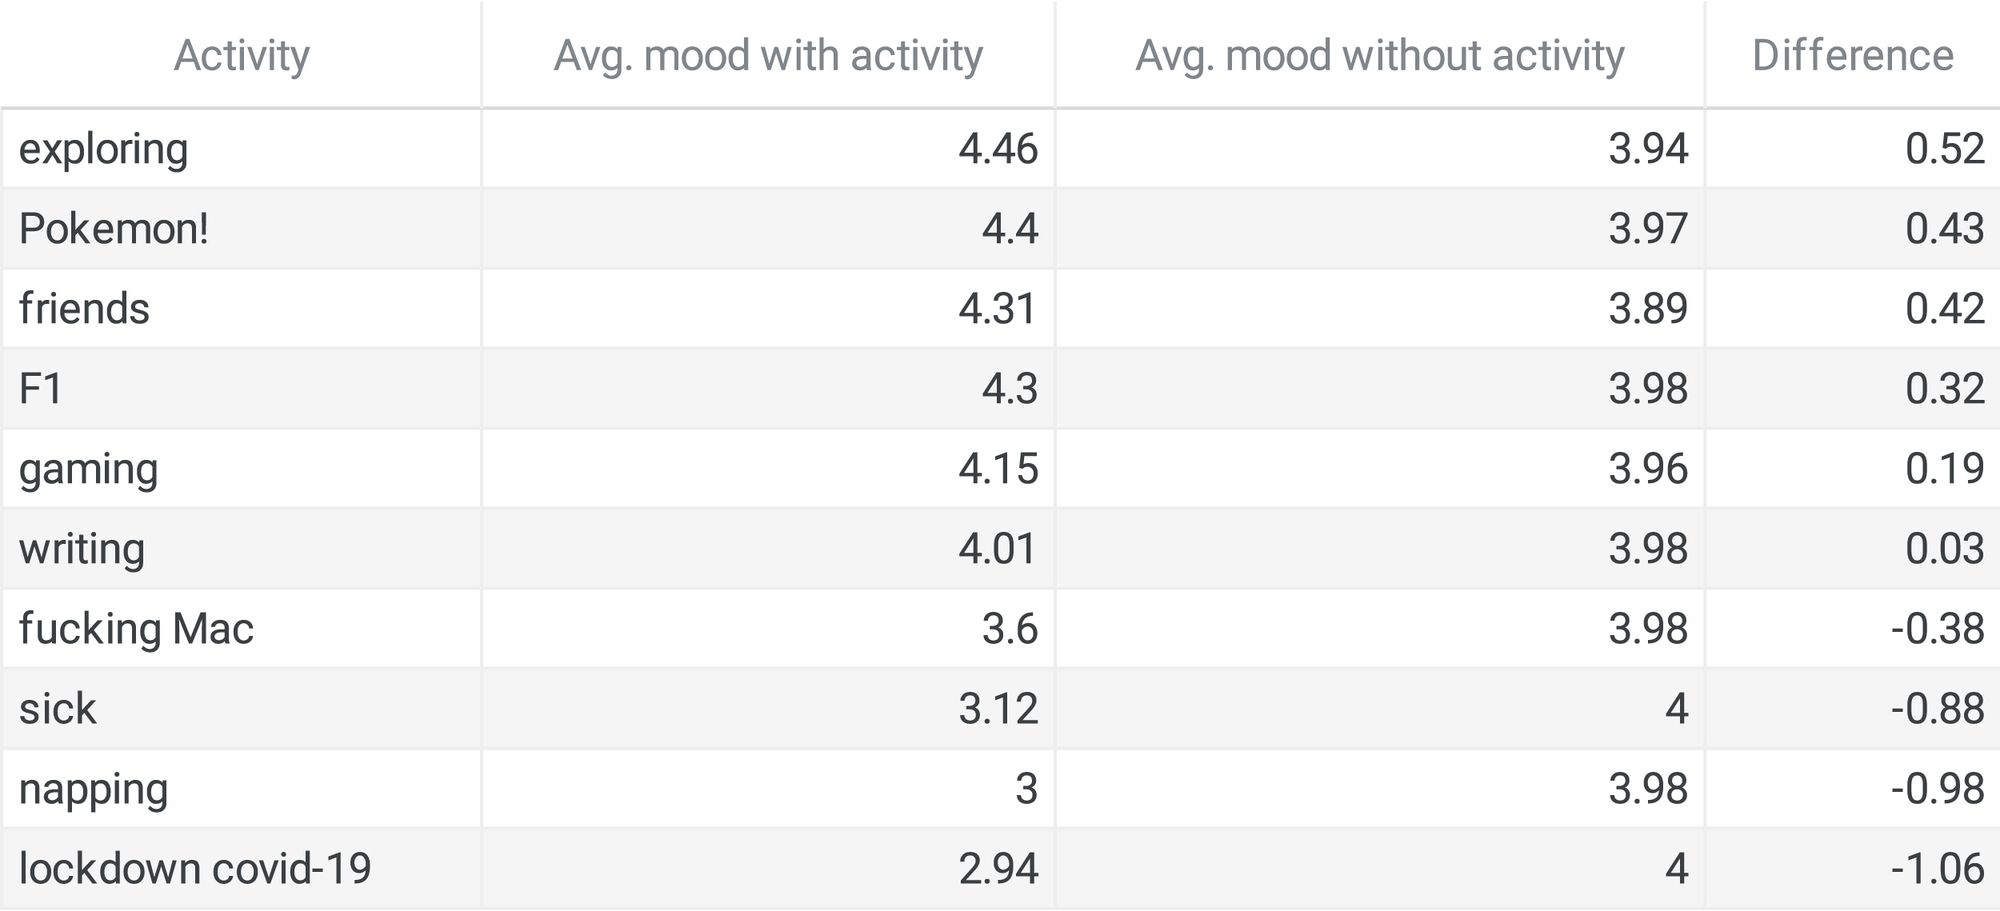 Table 1: Average mood score with the activity present, without the activity, and the difference.